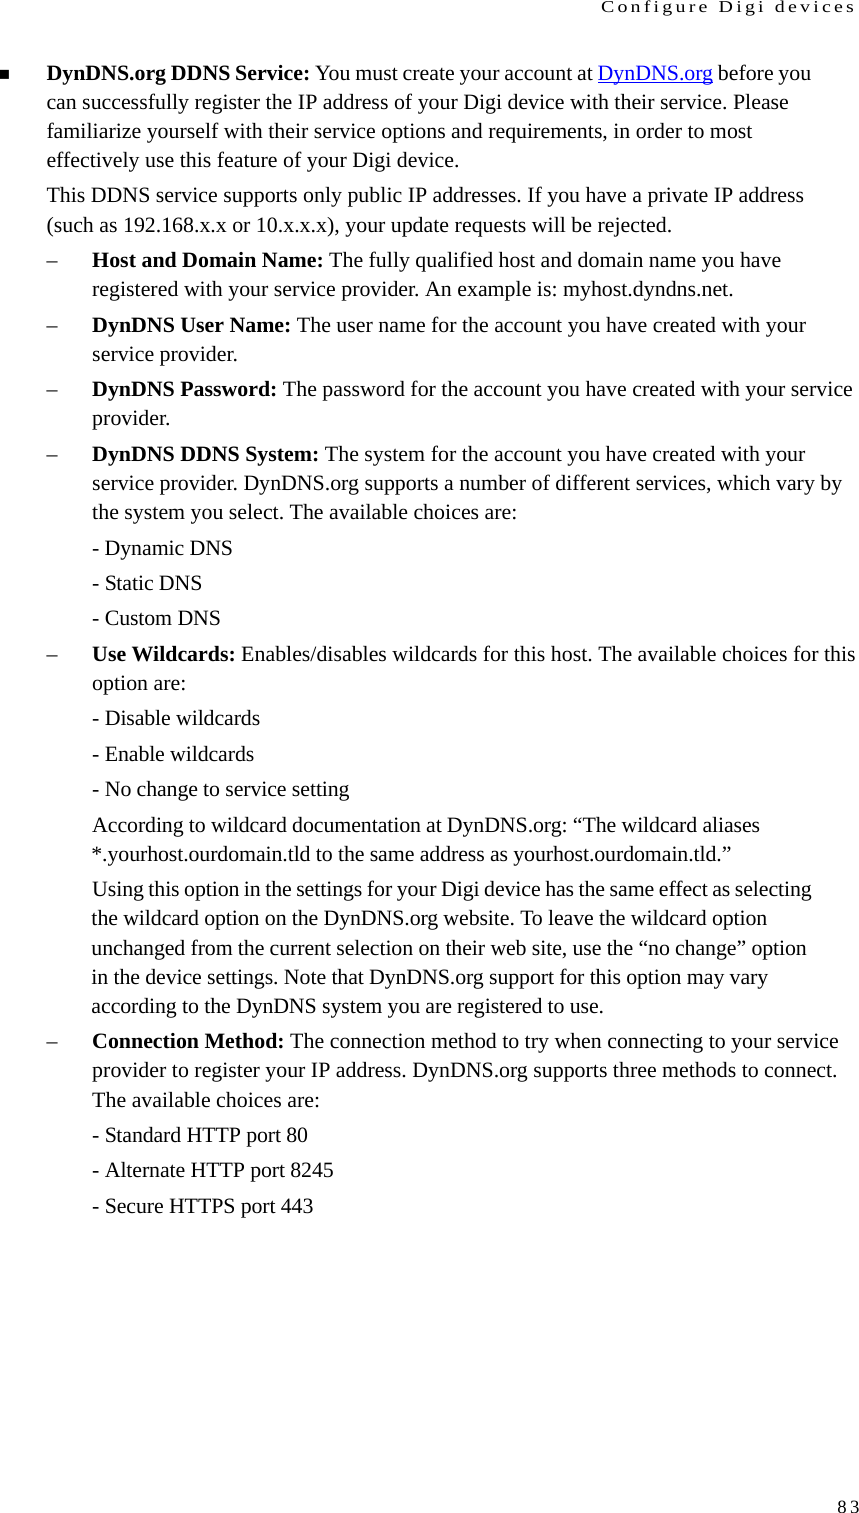 Configure Digi devices83DynDNS.org DDNS Service: You must create your account at DynDNS.org before you can successfully register the IP address of your Digi device with their service. Please familiarize yourself with their service options and requirements, in order to most effectively use this feature of your Digi device. This DDNS service supports only public IP addresses. If you have a private IP address (such as 192.168.x.x or 10.x.x.x), your update requests will be rejected. –Host and Domain Name: The fully qualified host and domain name you have registered with your service provider. An example is: myhost.dyndns.net. –DynDNS User Name: The user name for the account you have created with your service provider. –DynDNS Password: The password for the account you have created with your service provider. –DynDNS DDNS System: The system for the account you have created with your service provider. DynDNS.org supports a number of different services, which vary by the system you select. The available choices are: - Dynamic DNS - Static DNS - Custom DNS –Use Wildcards: Enables/disables wildcards for this host. The available choices for this option are: - Disable wildcards - Enable wildcards - No change to service setting According to wildcard documentation at DynDNS.org: “The wildcard aliases *.yourhost.ourdomain.tld to the same address as yourhost.ourdomain.tld.” Using this option in the settings for your Digi device has the same effect as selecting the wildcard option on the DynDNS.org website. To leave the wildcard option unchanged from the current selection on their web site, use the “no change” option in the device settings. Note that DynDNS.org support for this option may vary according to the DynDNS system you are registered to use. –Connection Method: The connection method to try when connecting to your service provider to register your IP address. DynDNS.org supports three methods to connect. The available choices are: - Standard HTTP port 80 - Alternate HTTP port 8245 - Secure HTTPS port 443 